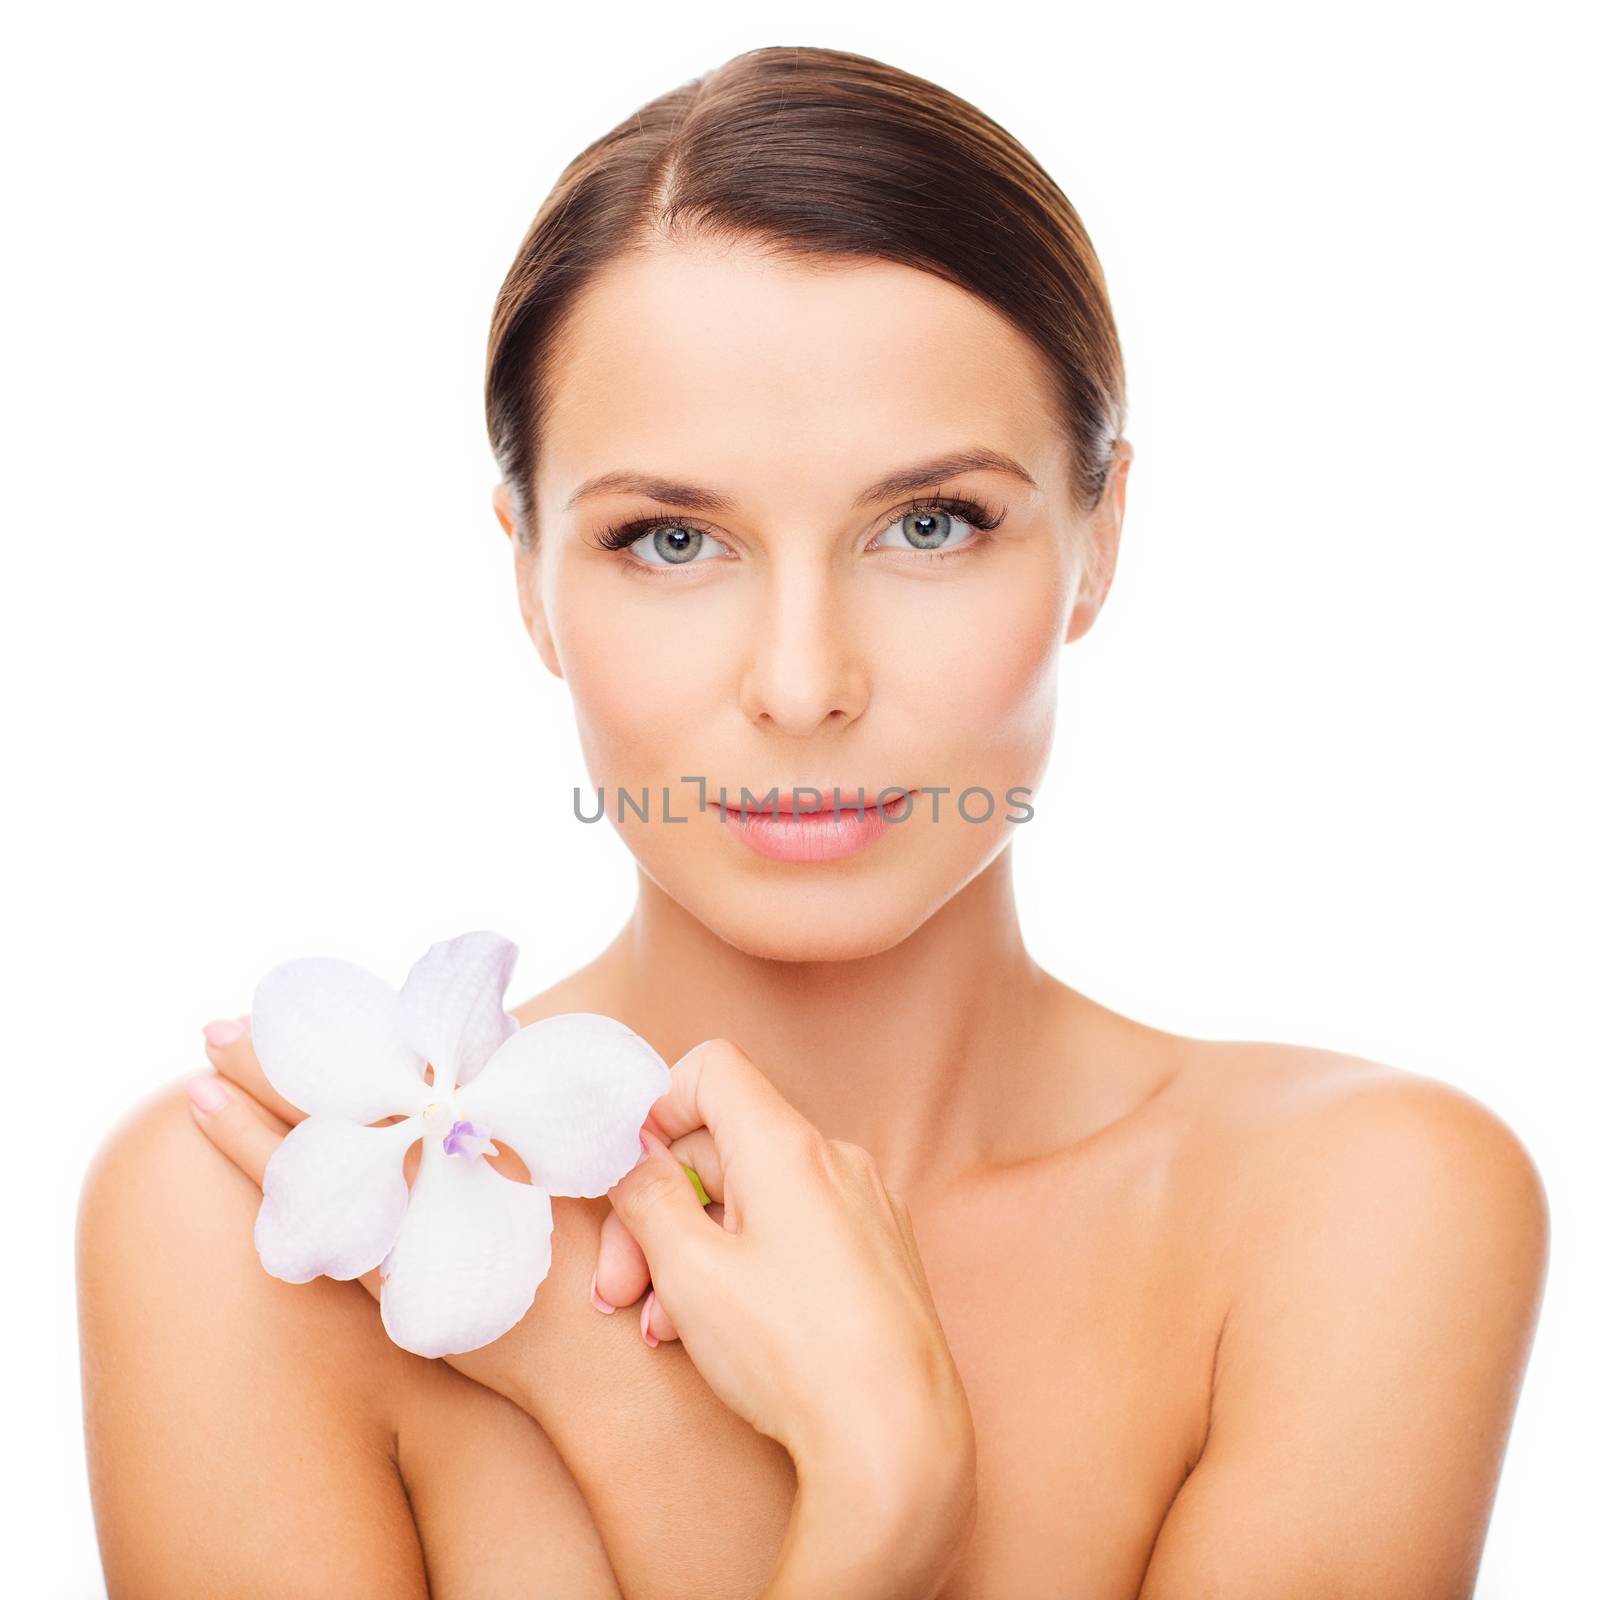 health and beauty concept - relaxed woman with orhid flower